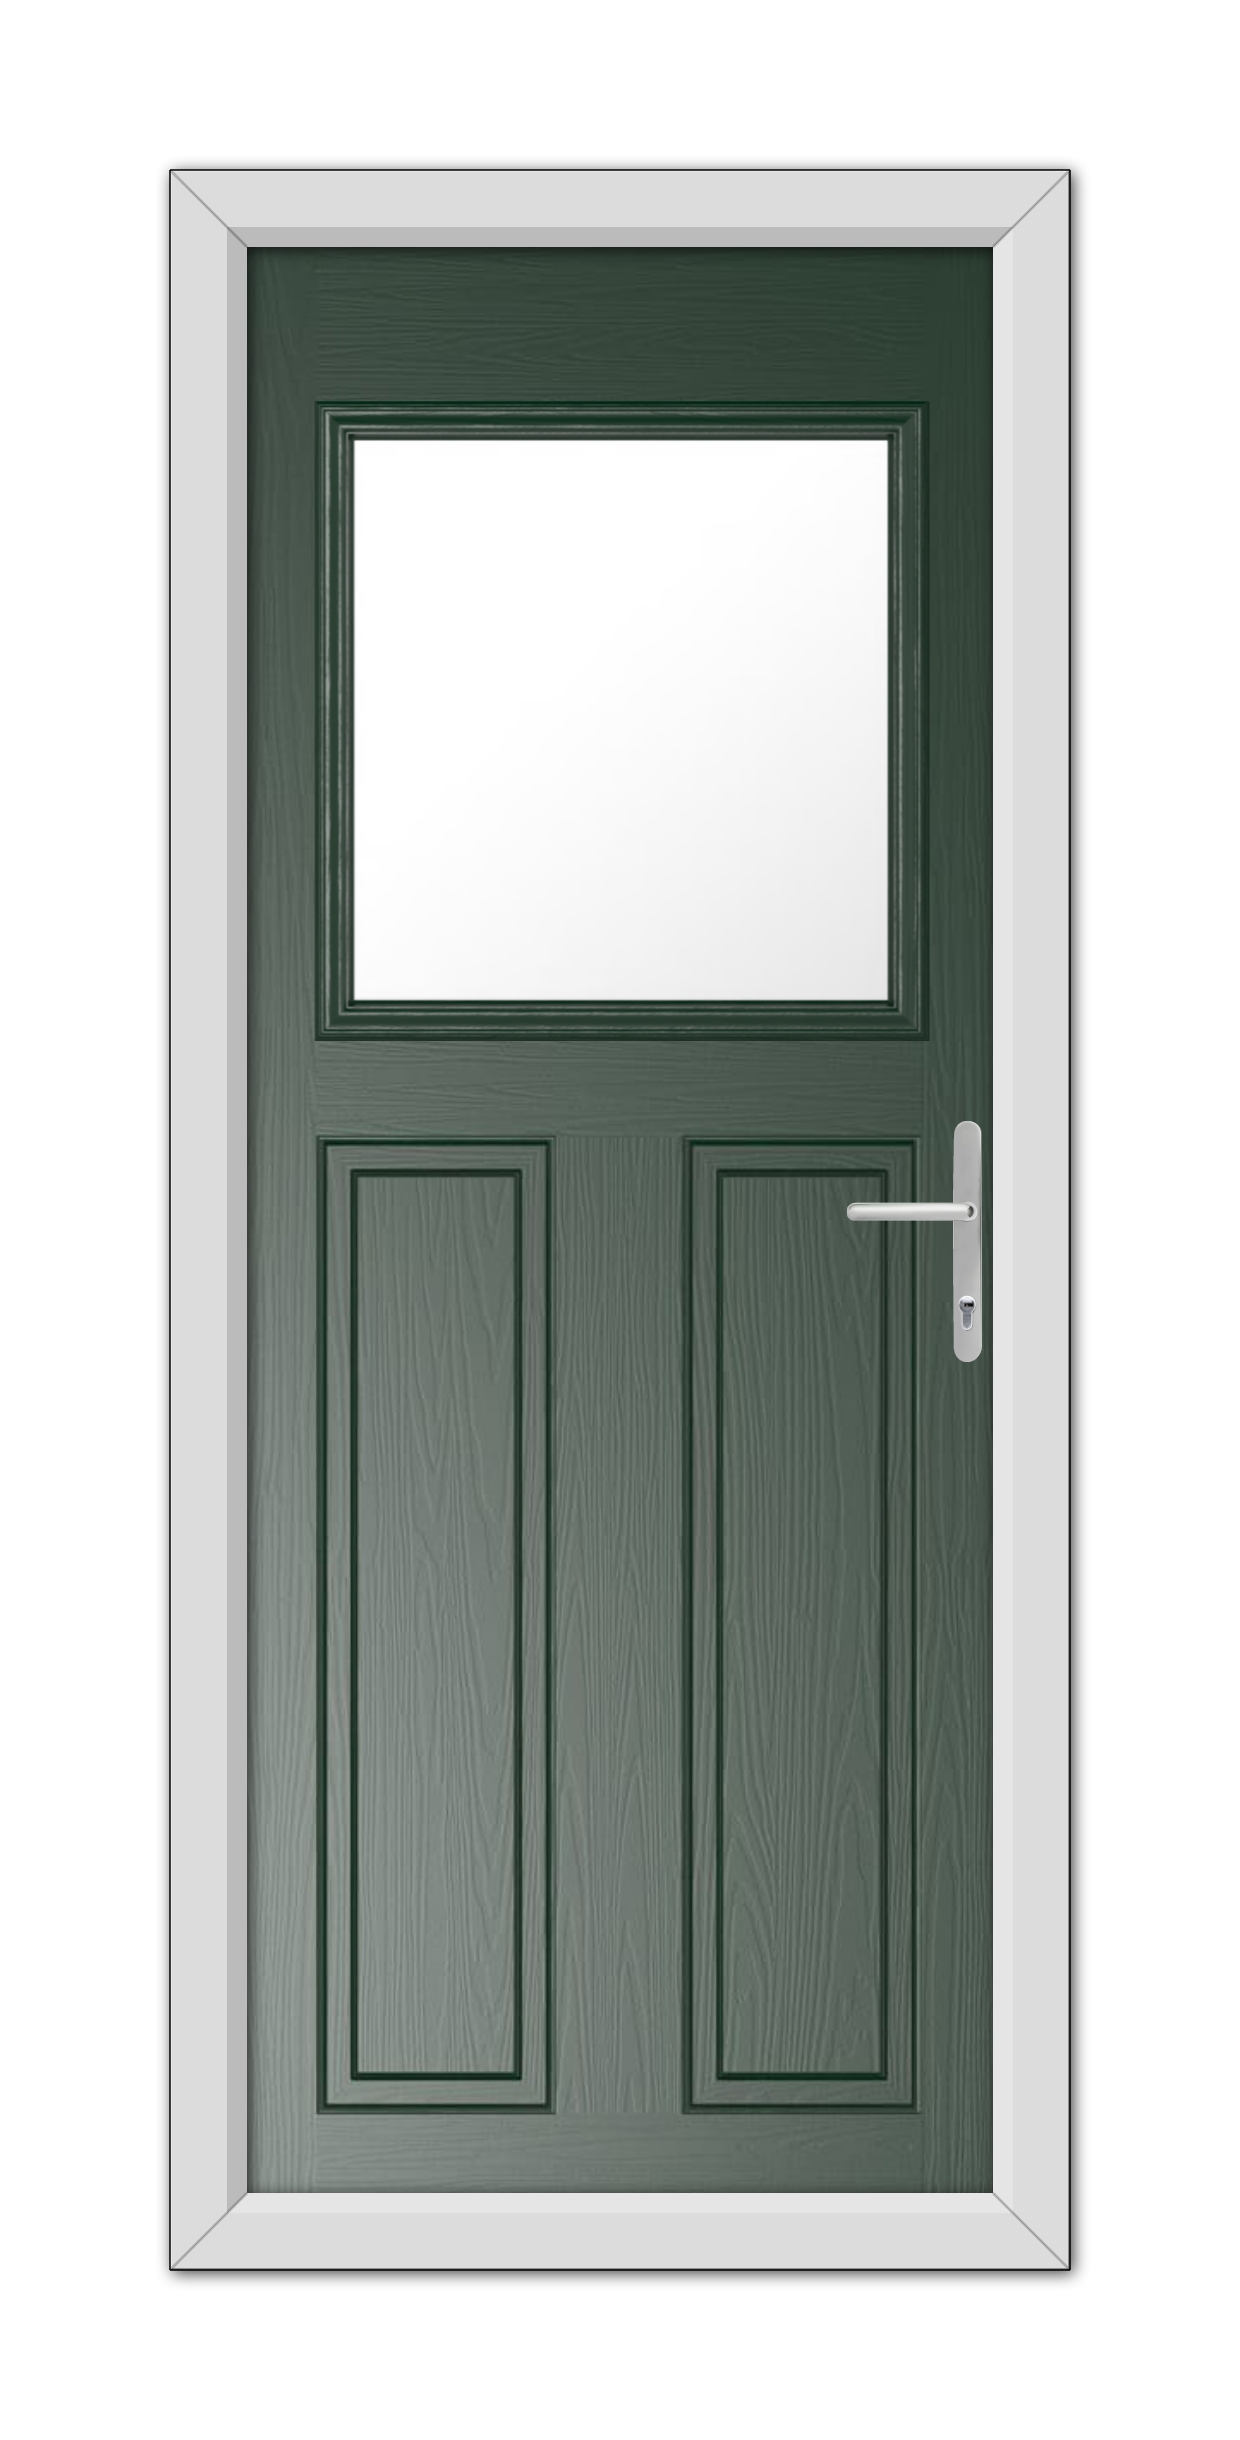 A Green Axwell Composite Door 48mm Timber Core with a large rectangular window at the top and a metal handle on the right, set within a white frame.